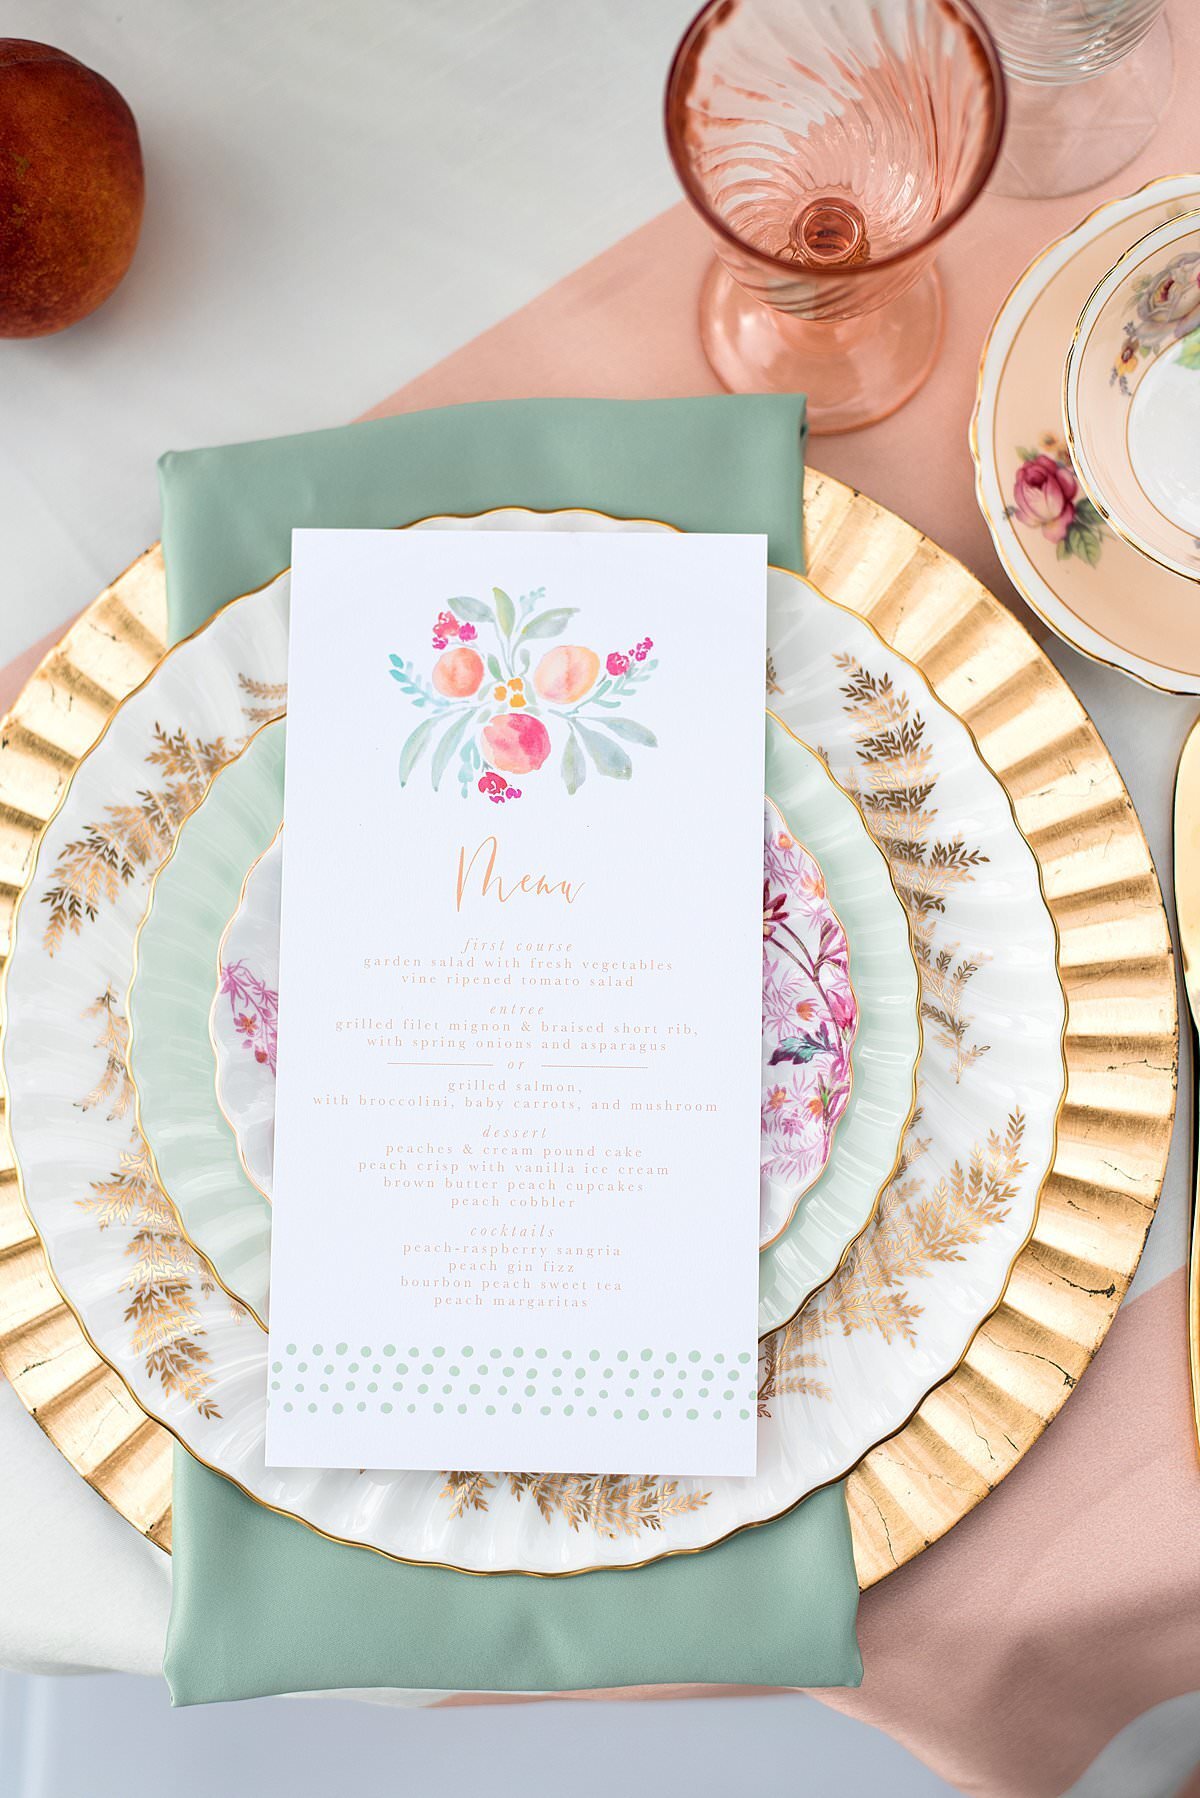 table place setting with a gold charger, teal napkin, vintage china dinner plate, vintage china salad plate, vintage china dessert plate and floral menu card